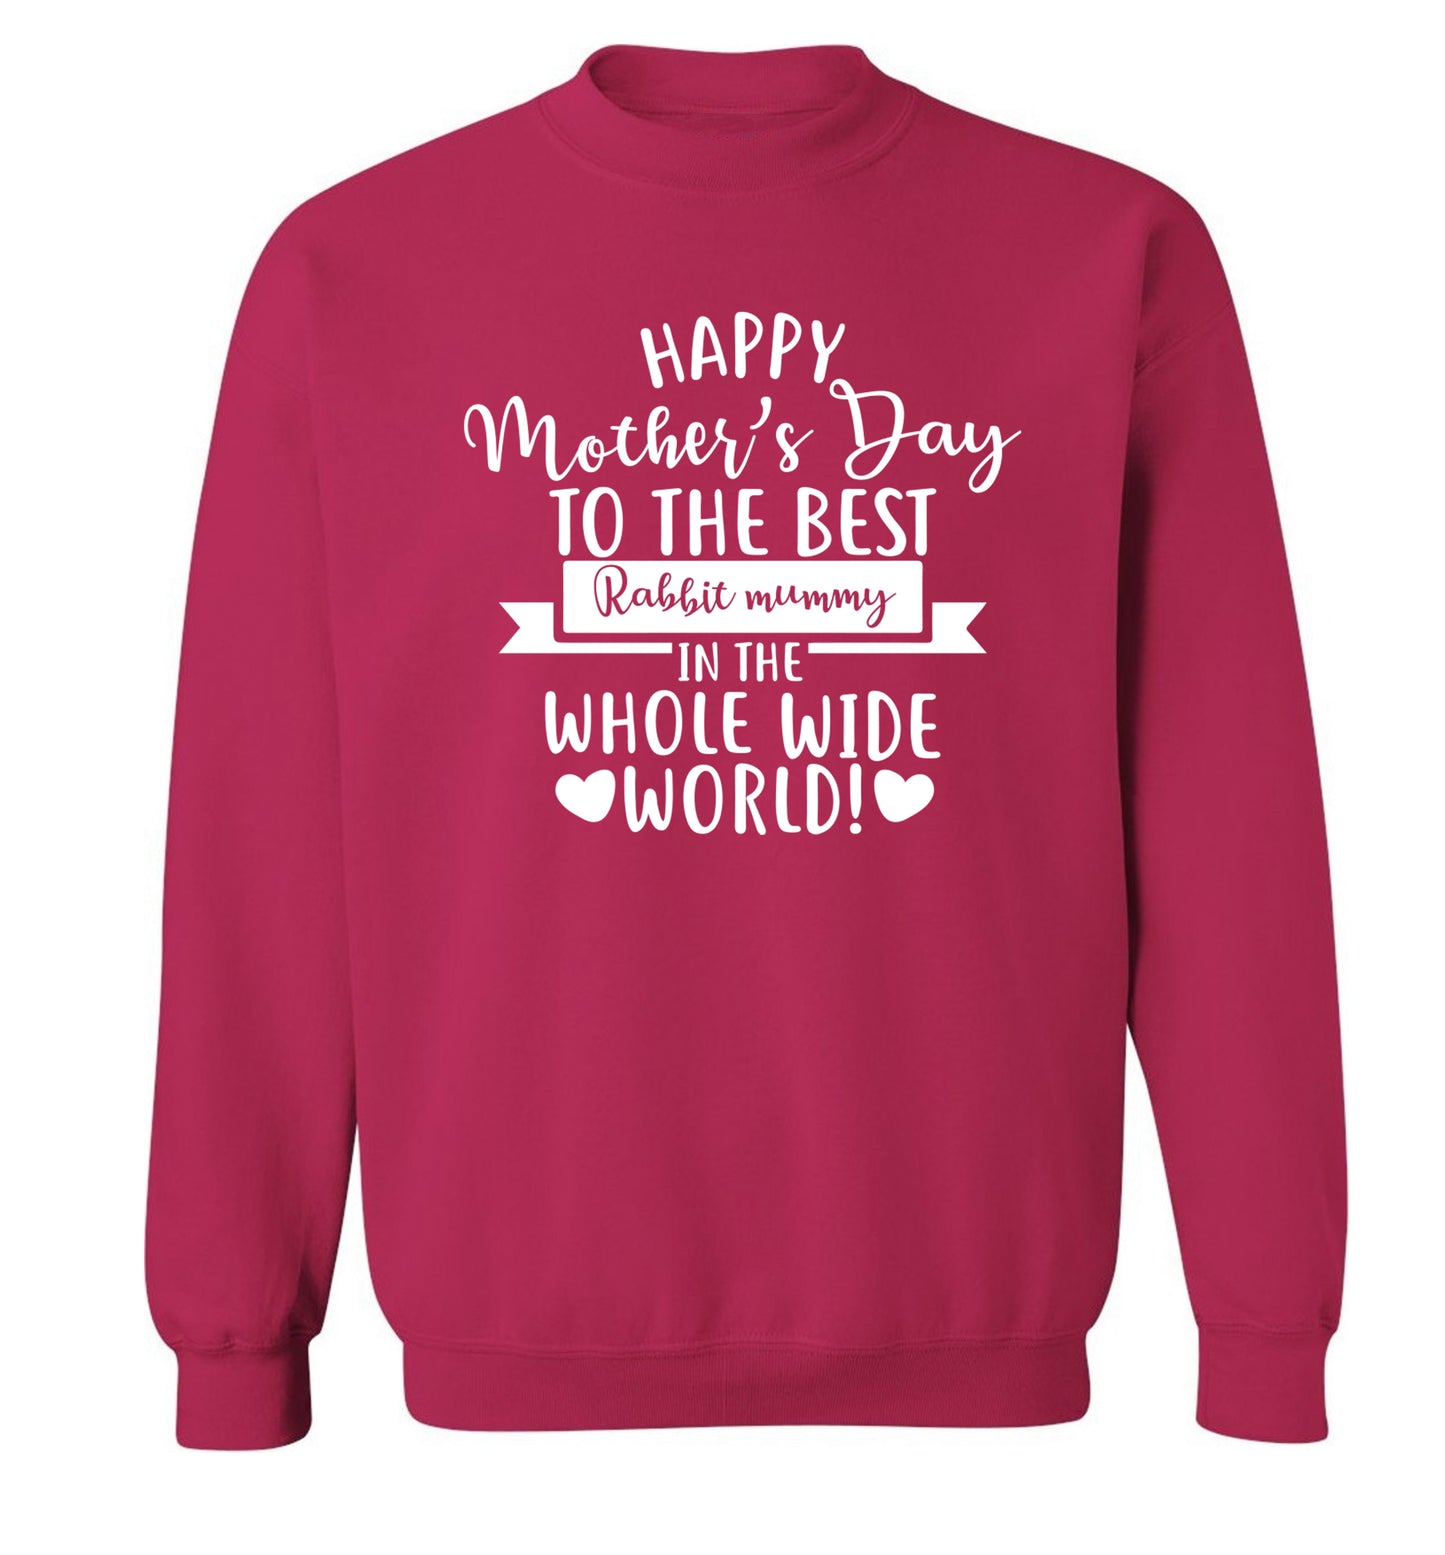 Happy mother's day to the best rabbit mummy in the world Adult's unisex pink Sweater 2XL